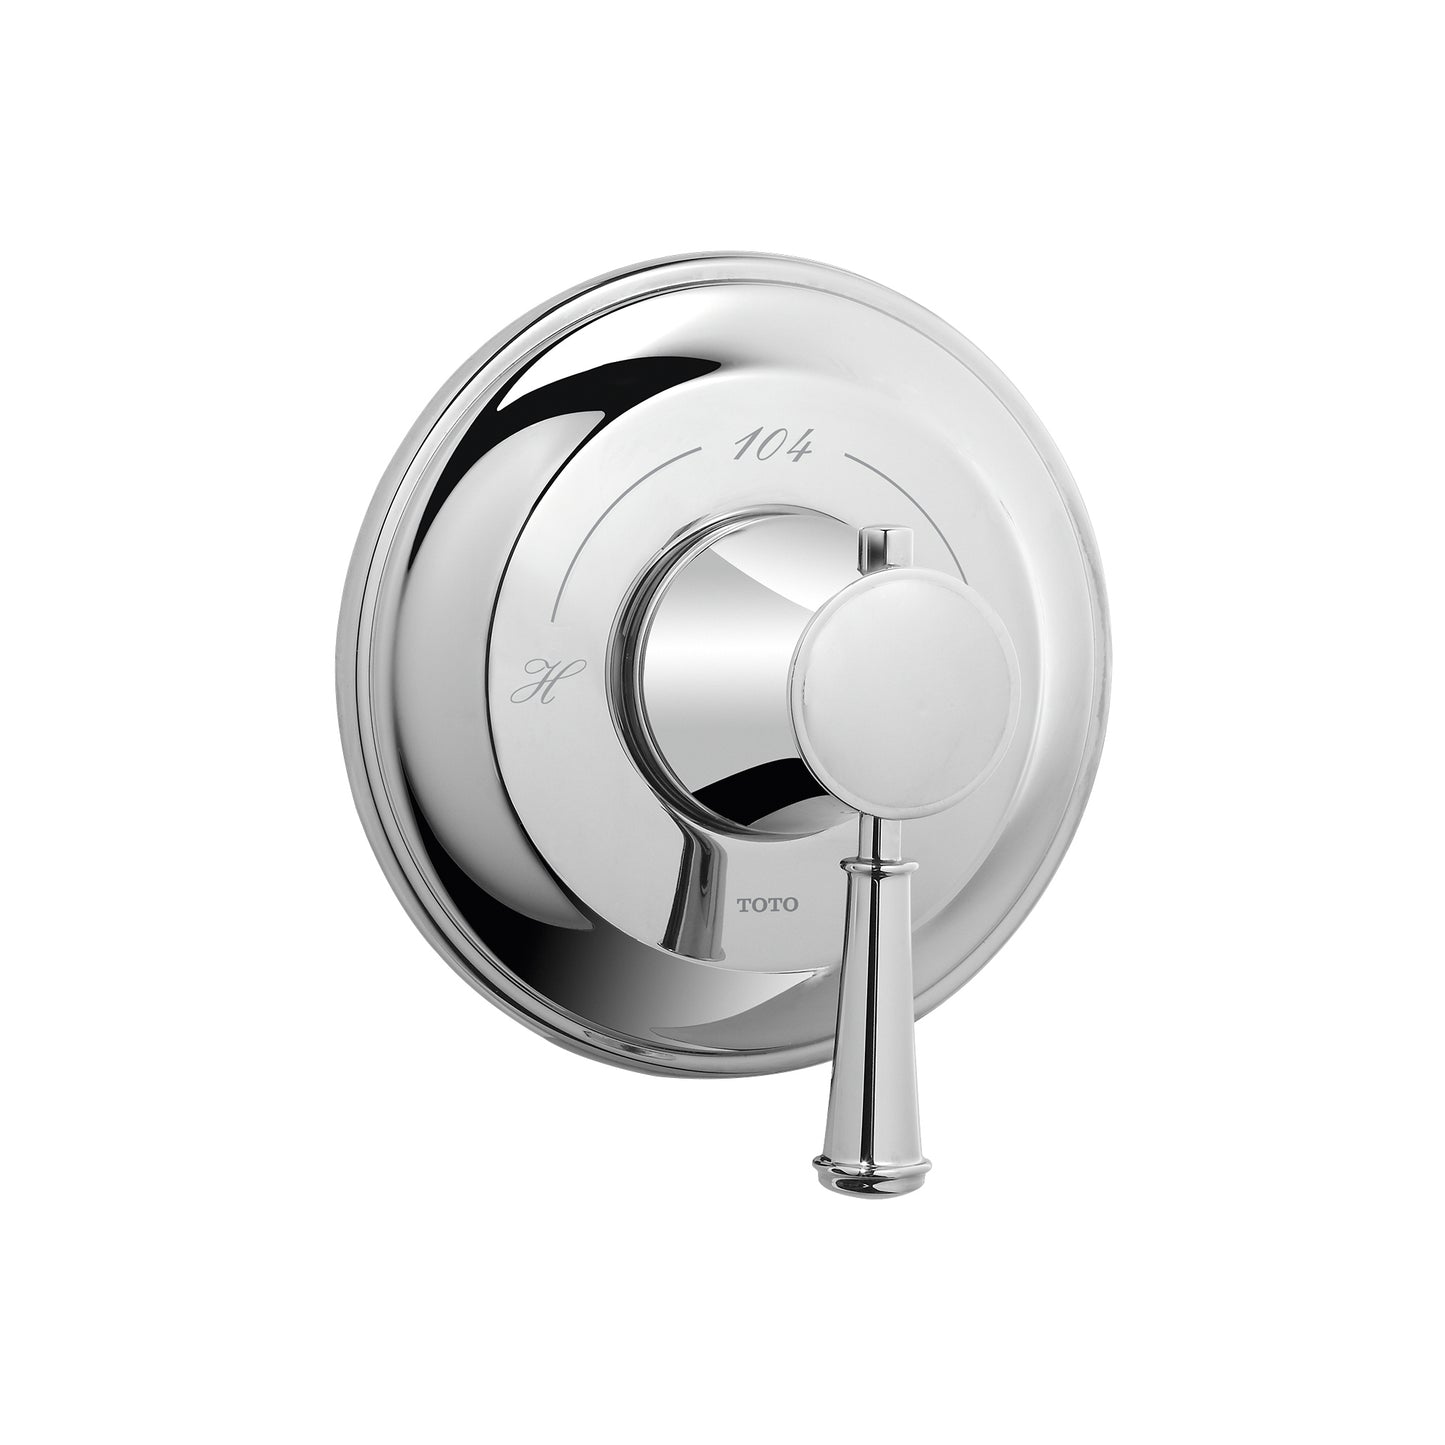 Toto TS220T#CP - Vivian Lever Handle Thermostatic Mixing Valve Trim, Polished Chrome